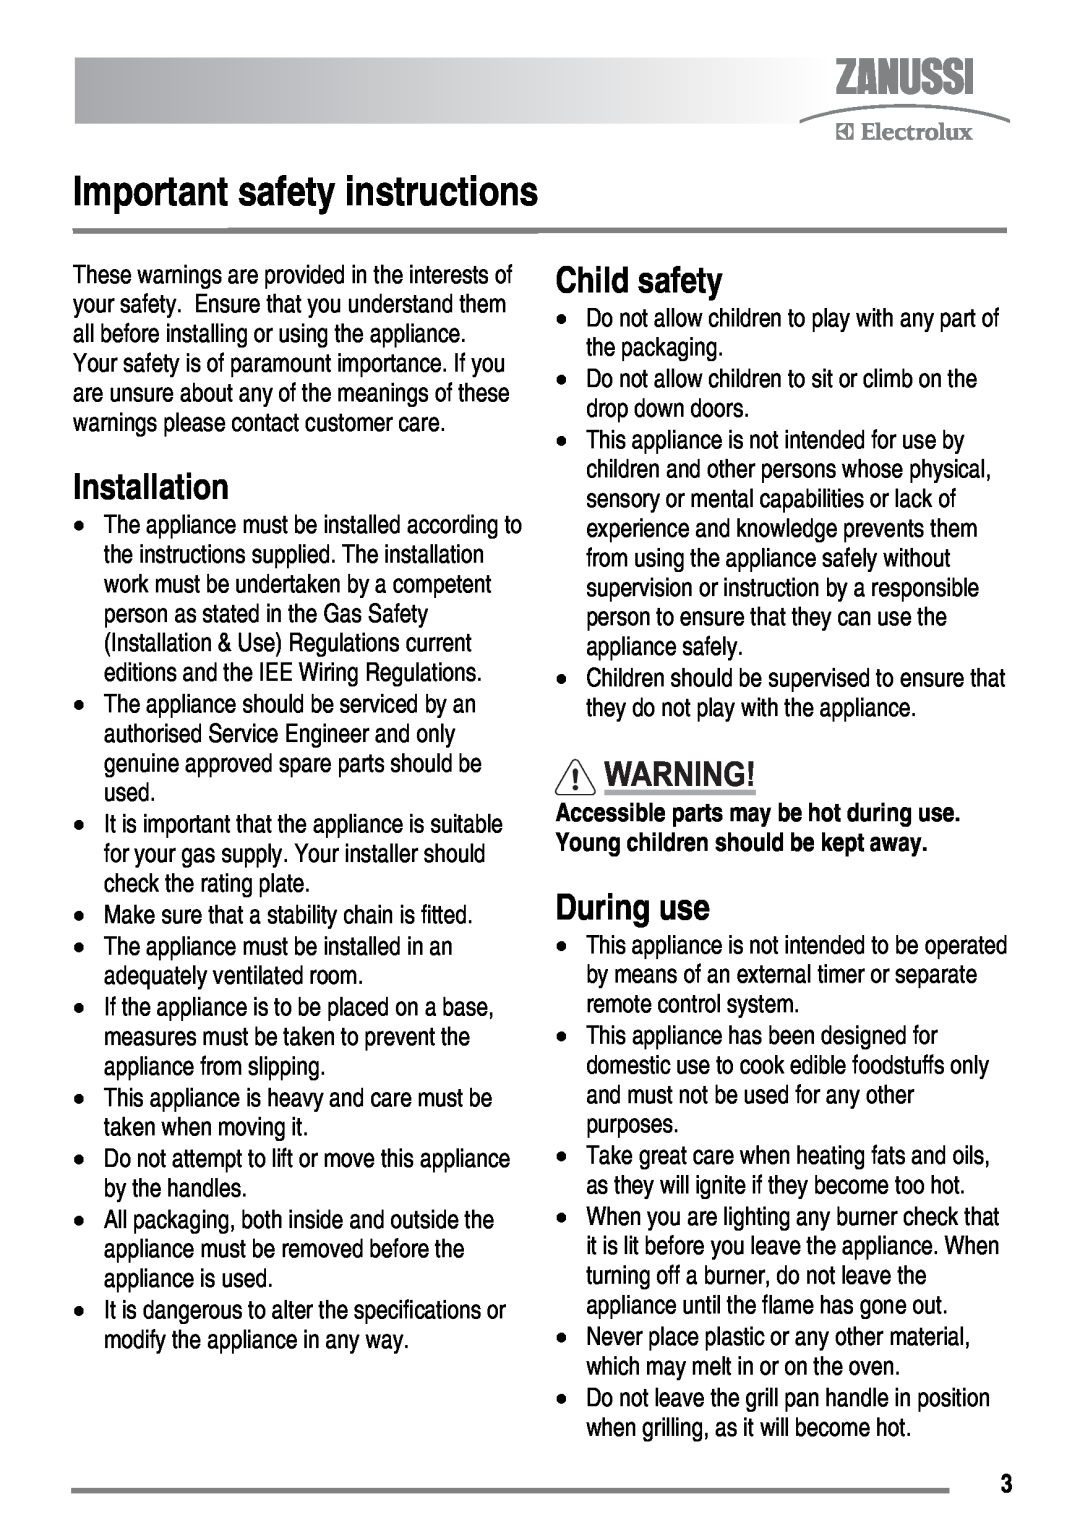 Zanussi ZKG6010 user manual Important safety instructions, Installation, Child safety, During use 